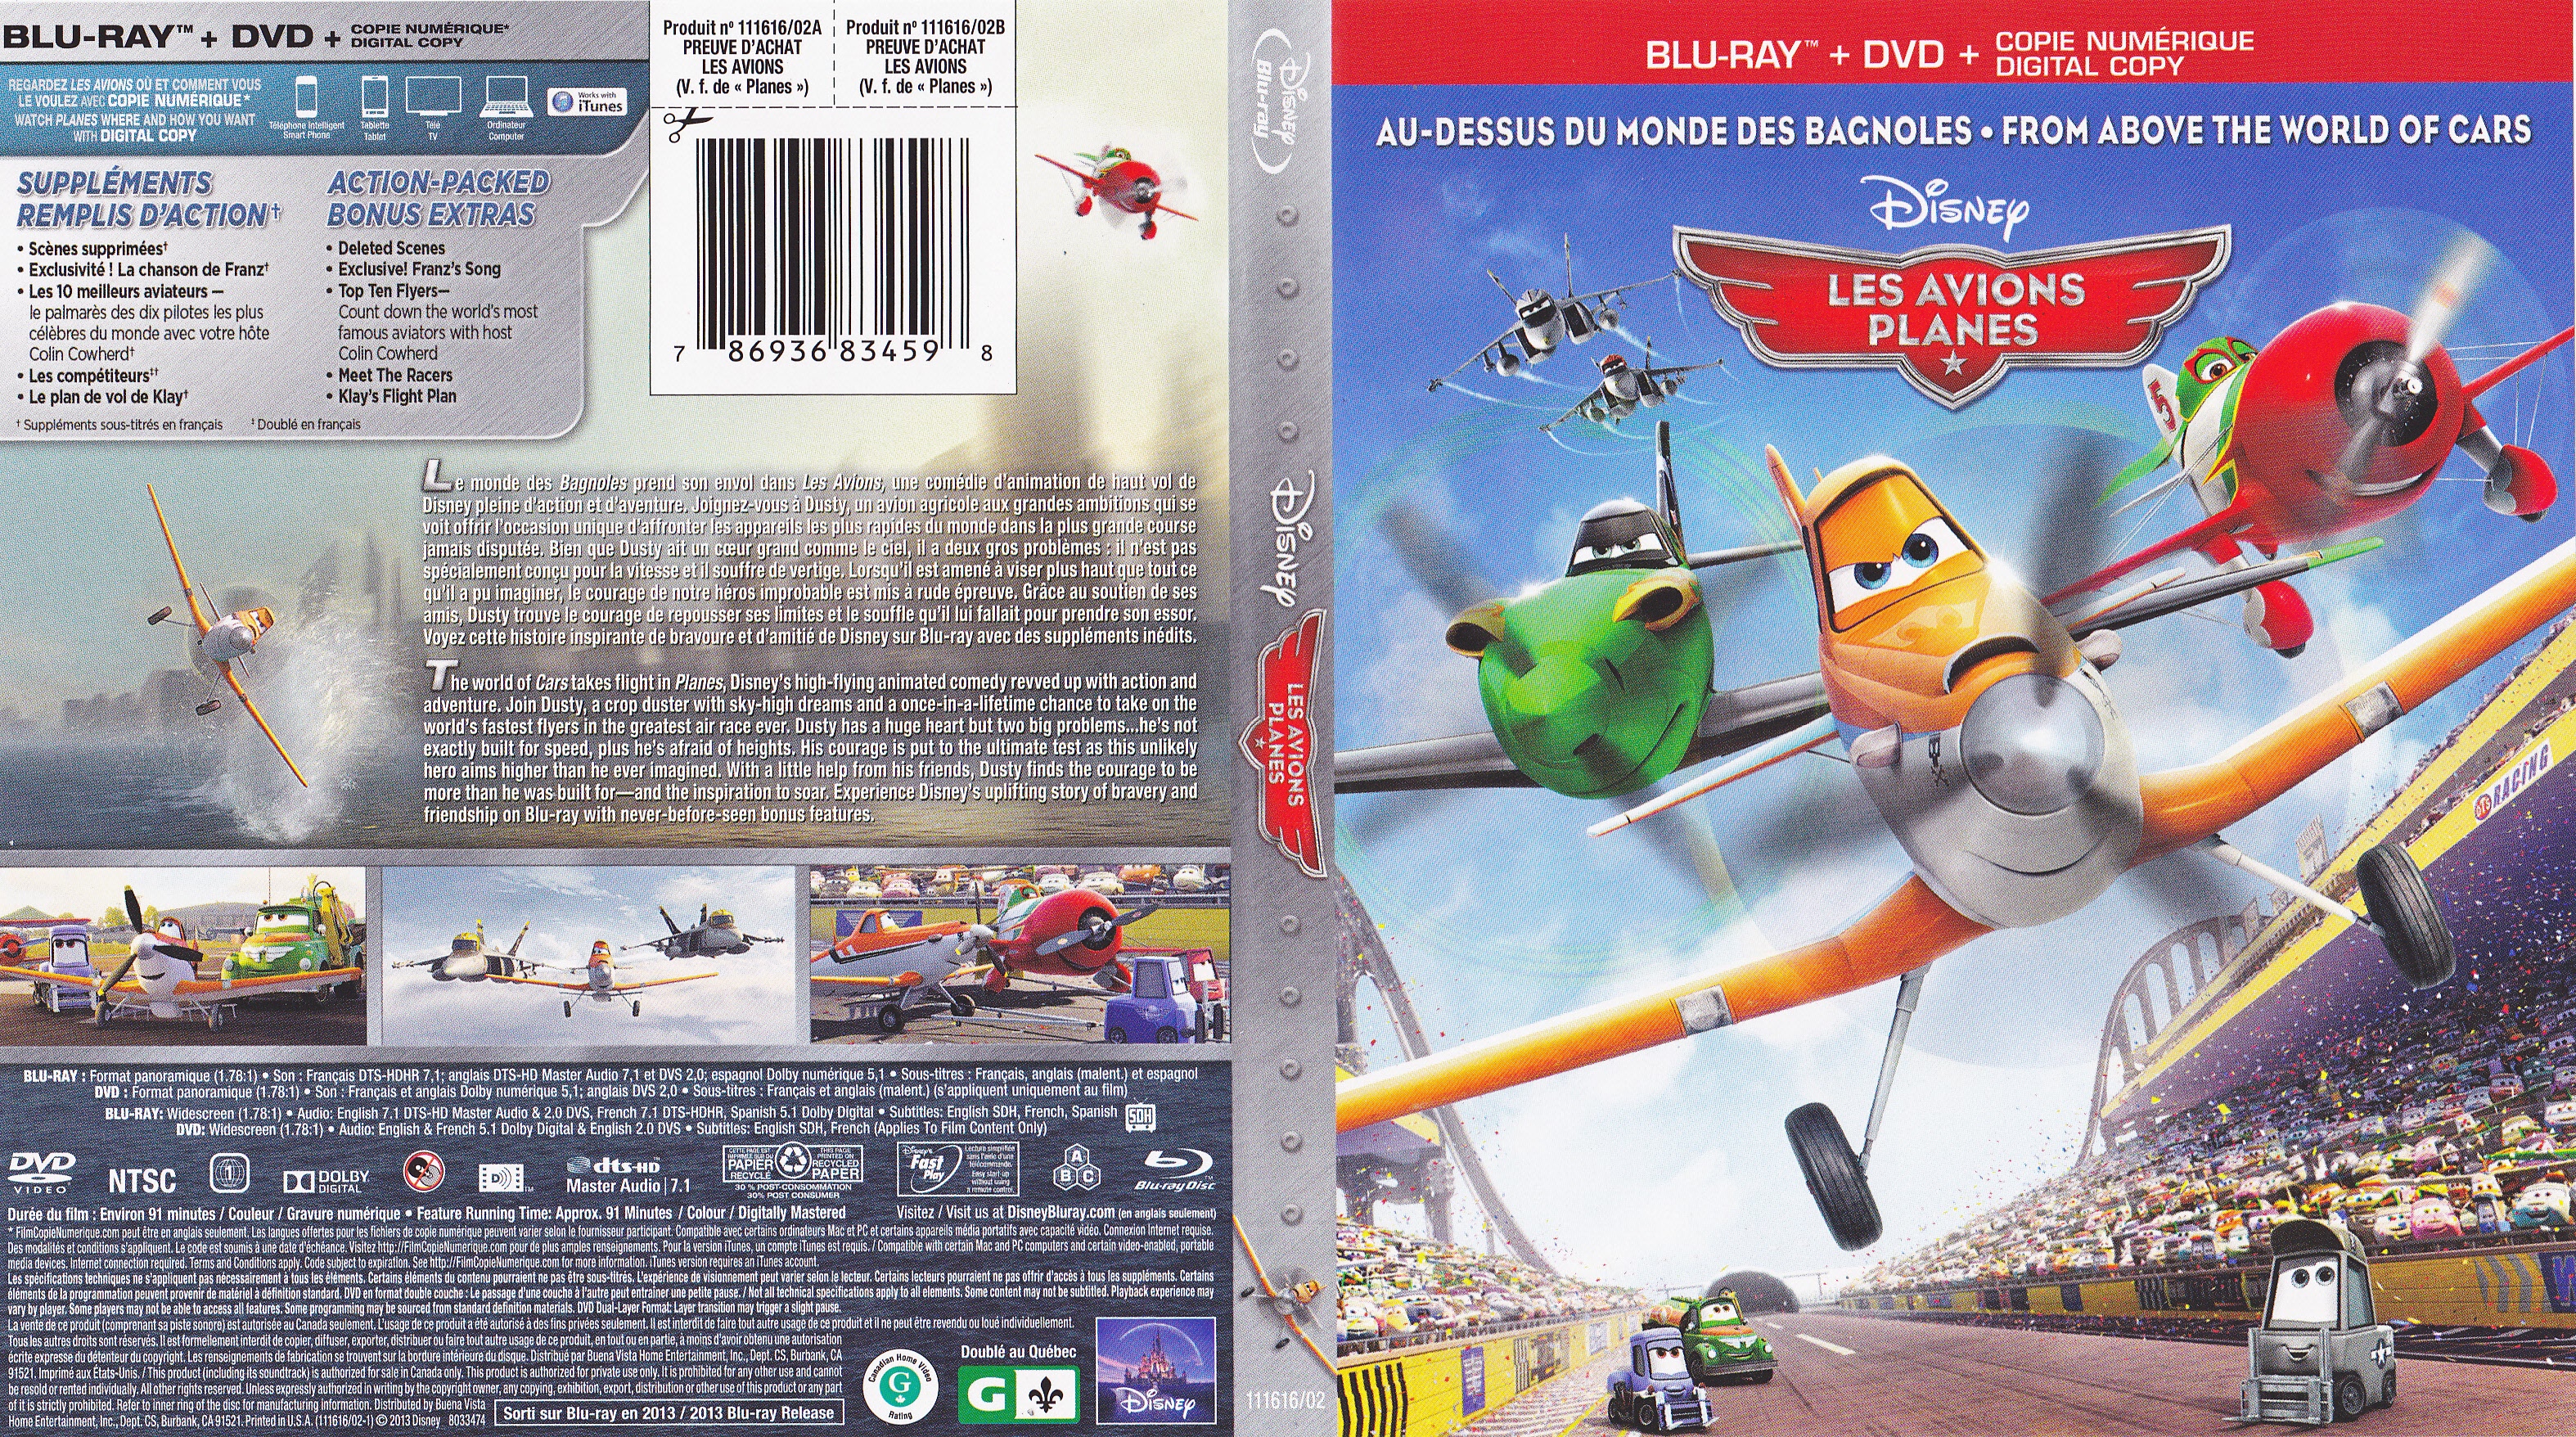 Jaquette DVD Les avions - Planes (Canadienne) (BLU-RAY)